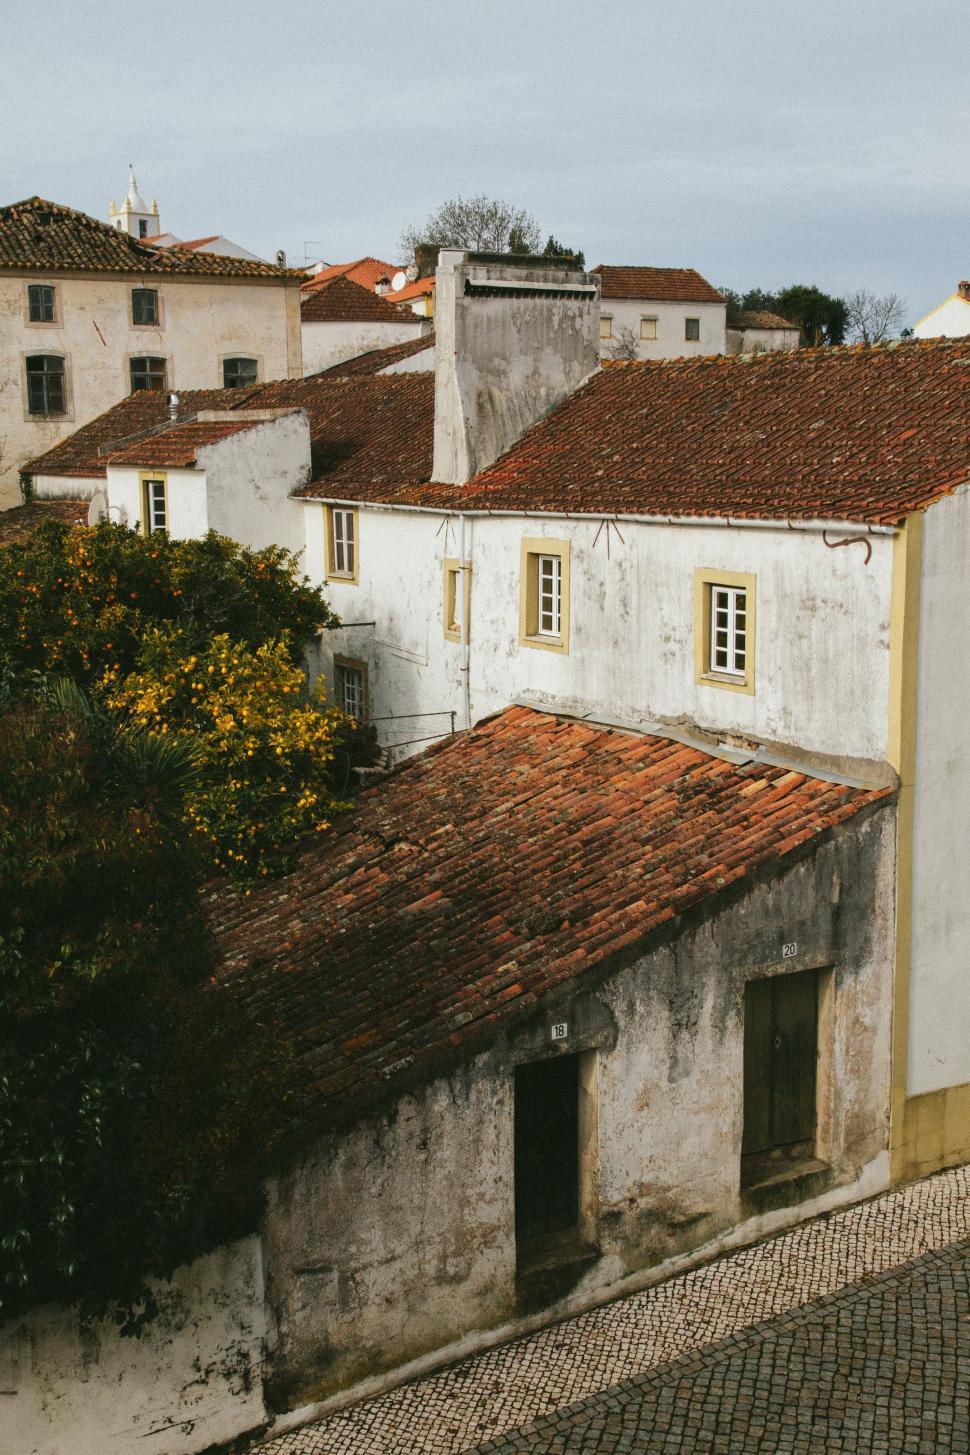 Free Image of Old Building With Red Tiled Roof 